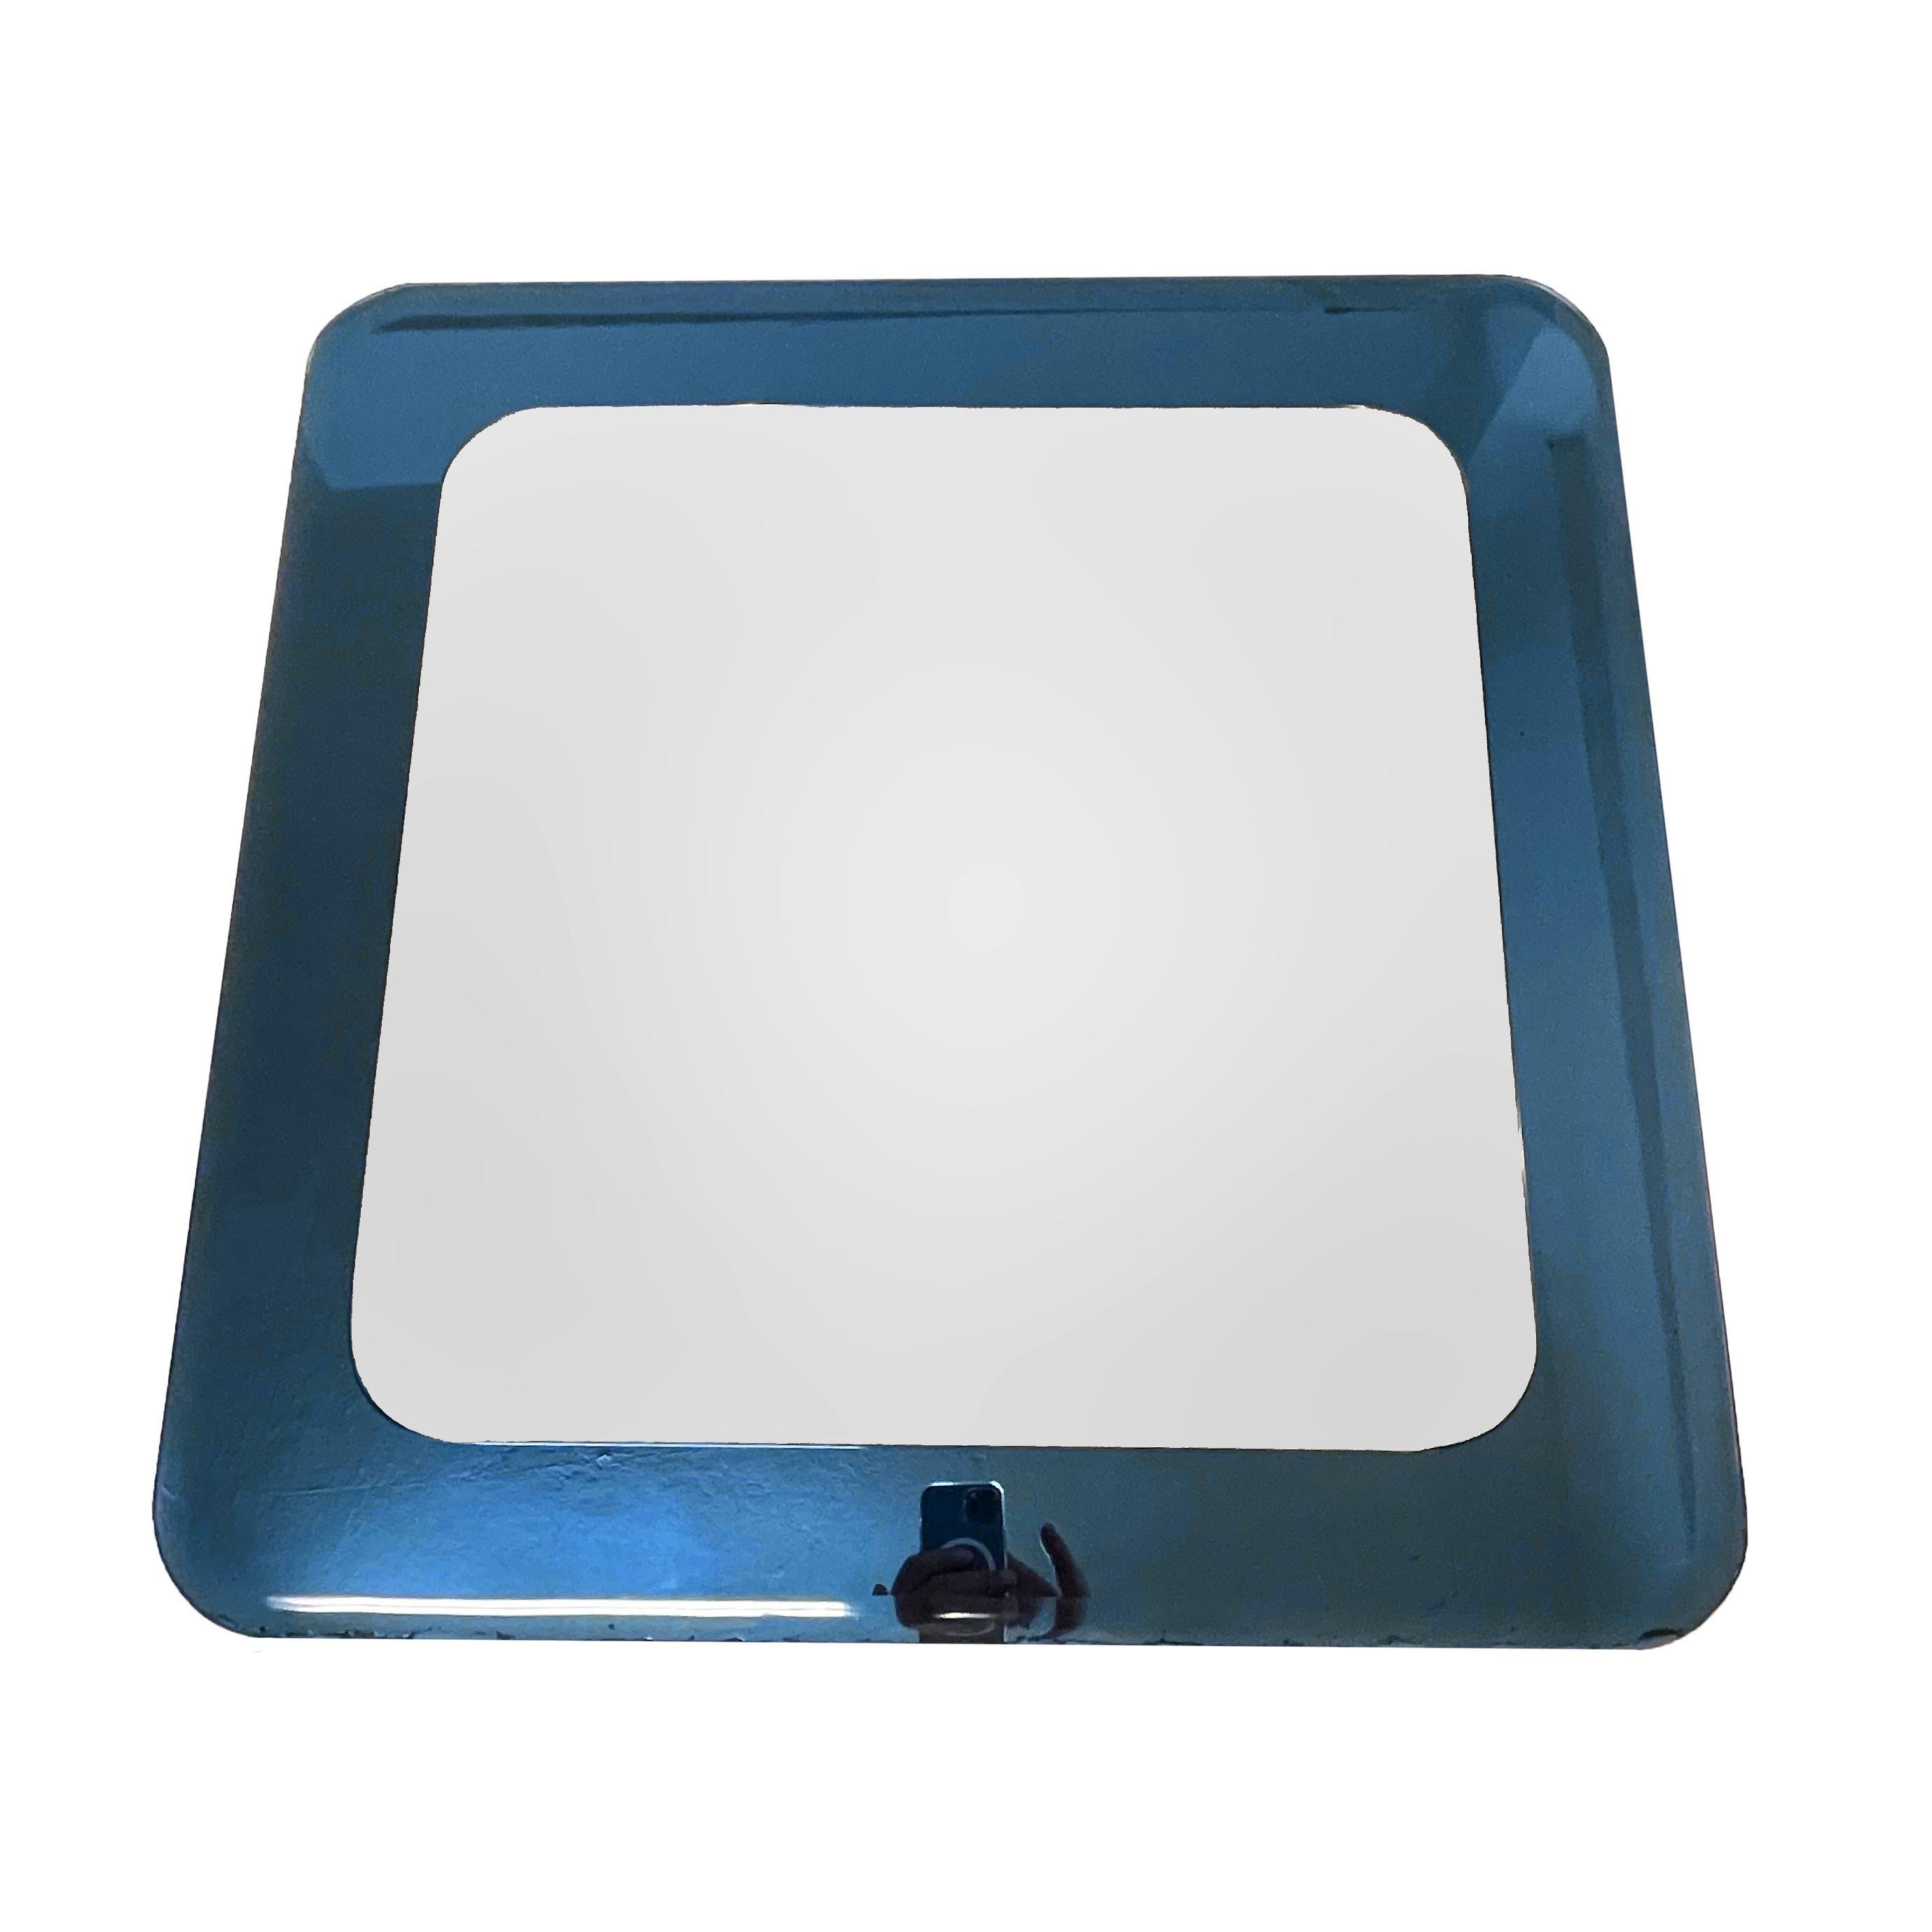 Midcentury Cristal Art Square Italian Wall Mirror with Blue Glass Frame, 1960s For Sale 6